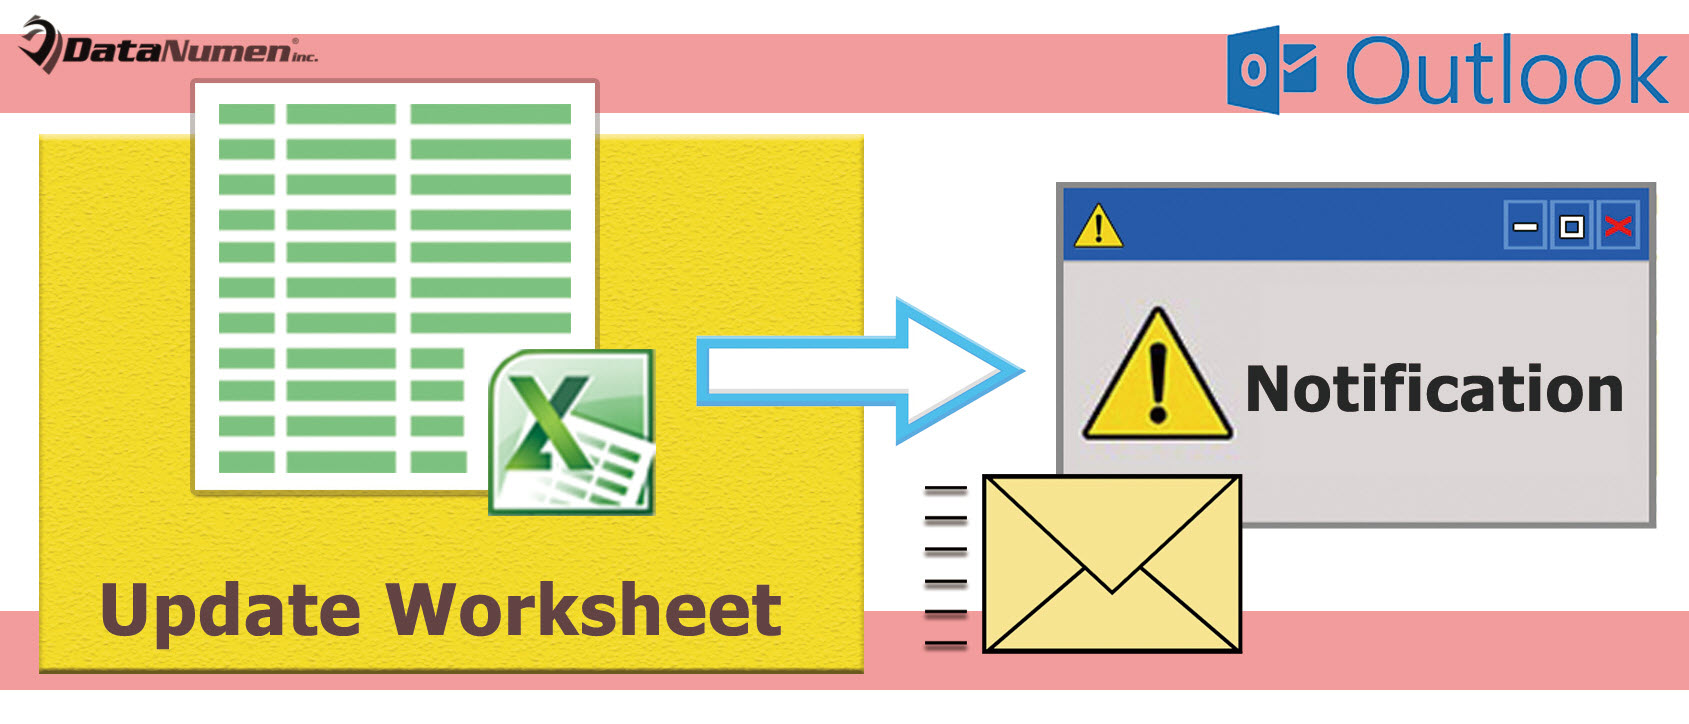 Auto Send an Outlook Email Notification when a Specific Excel Worksheet Is Updated